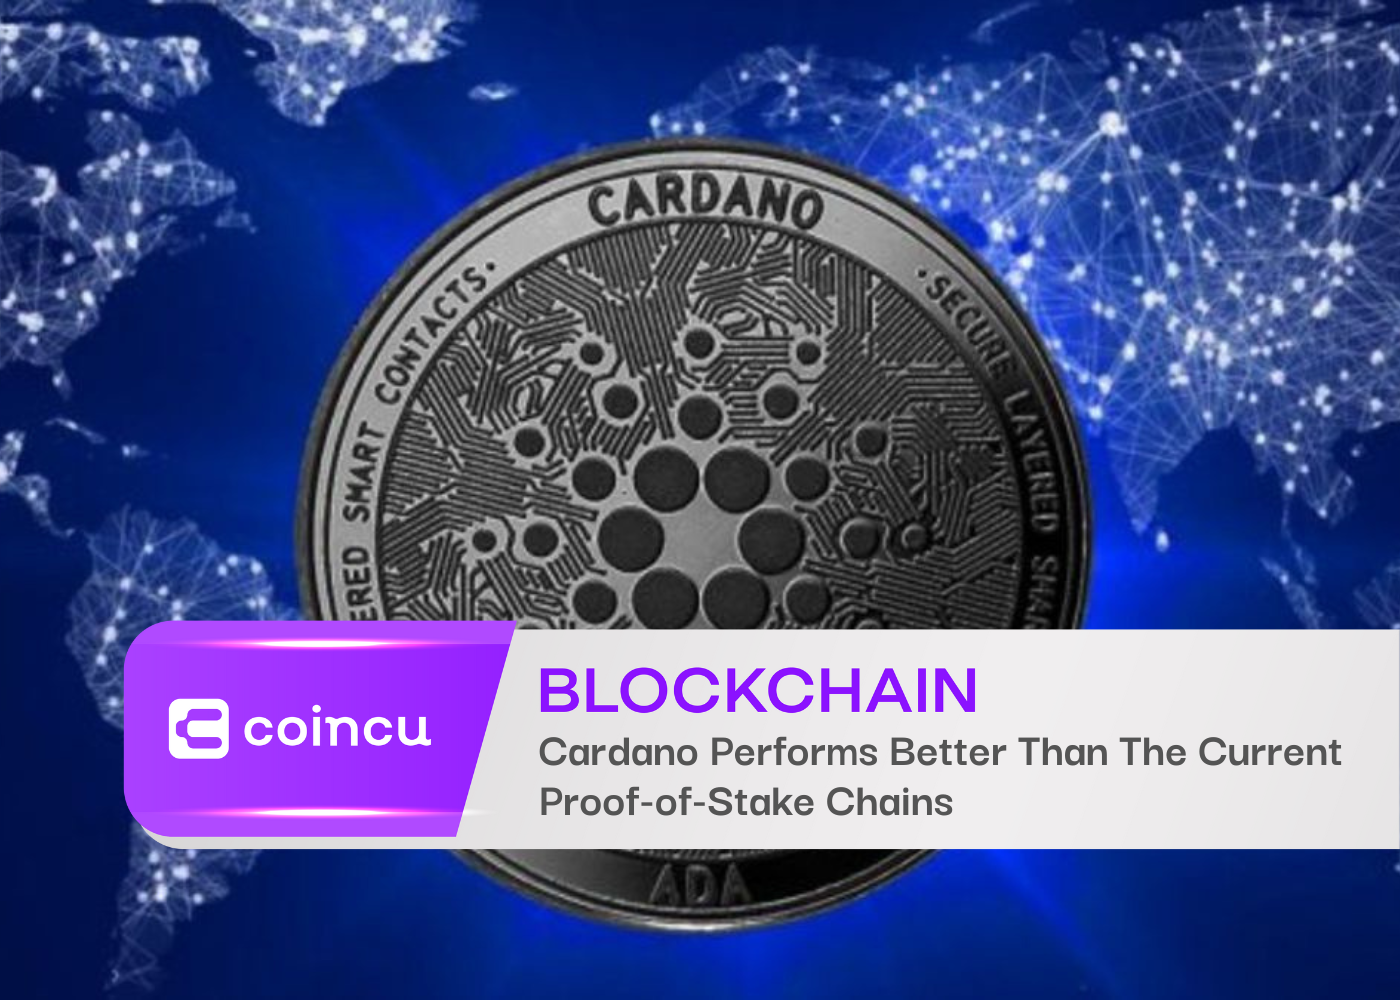 Cardano Performs Better Than The Current